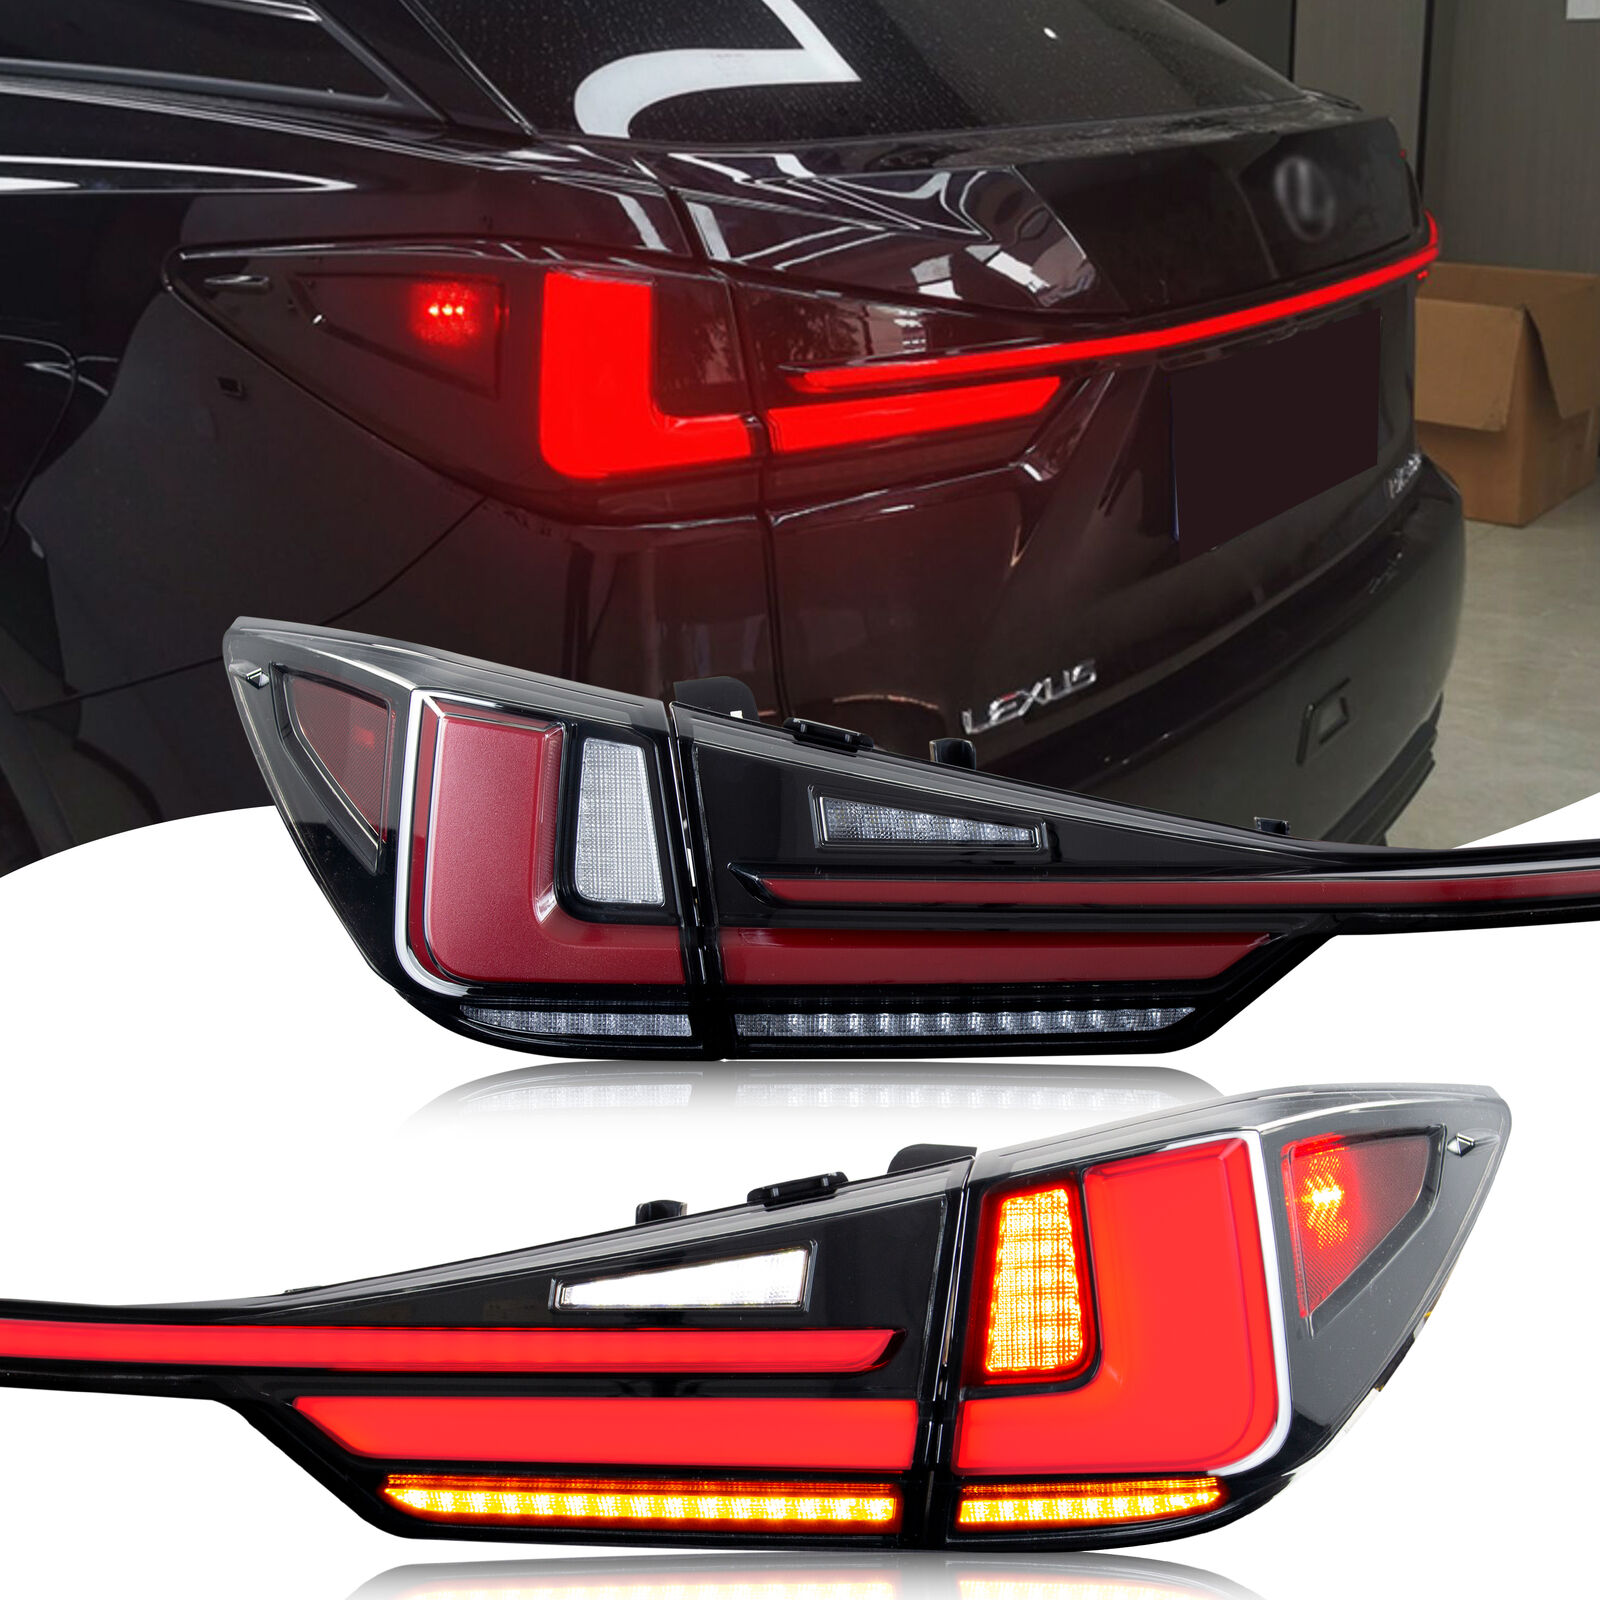 LED Sequential Tail Lights & Middle Lamp for Lexus RX350 RX450 F Sport 2016-2022